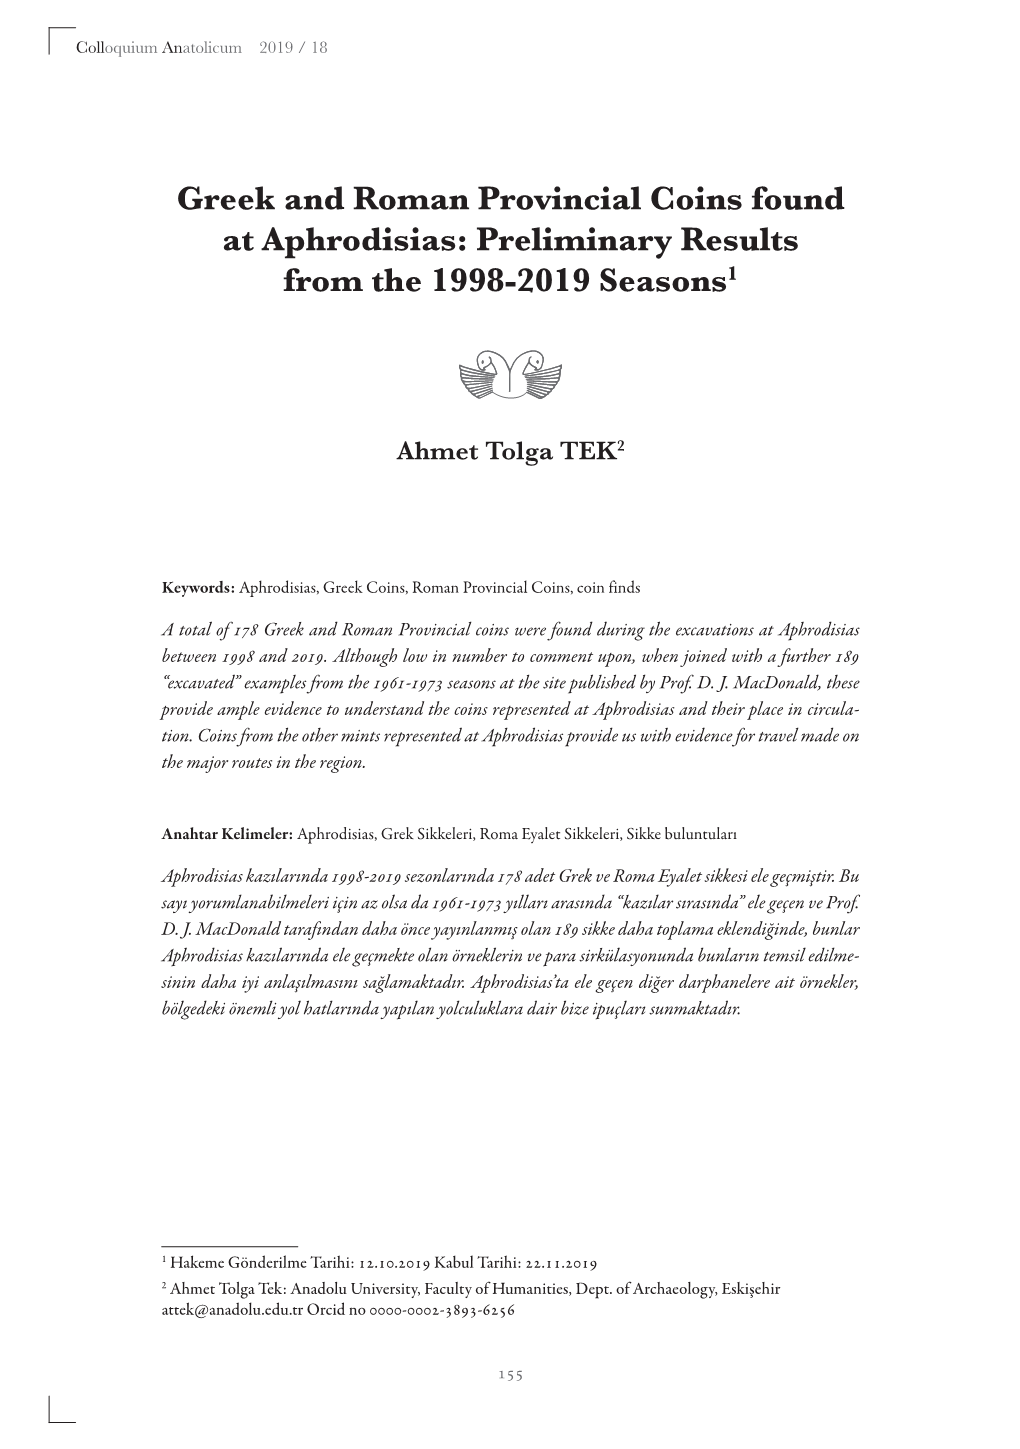 Greek and Roman Provincial Coins Found at Aphrodisias: Preliminary Results from the 1998-2019 Seasons1